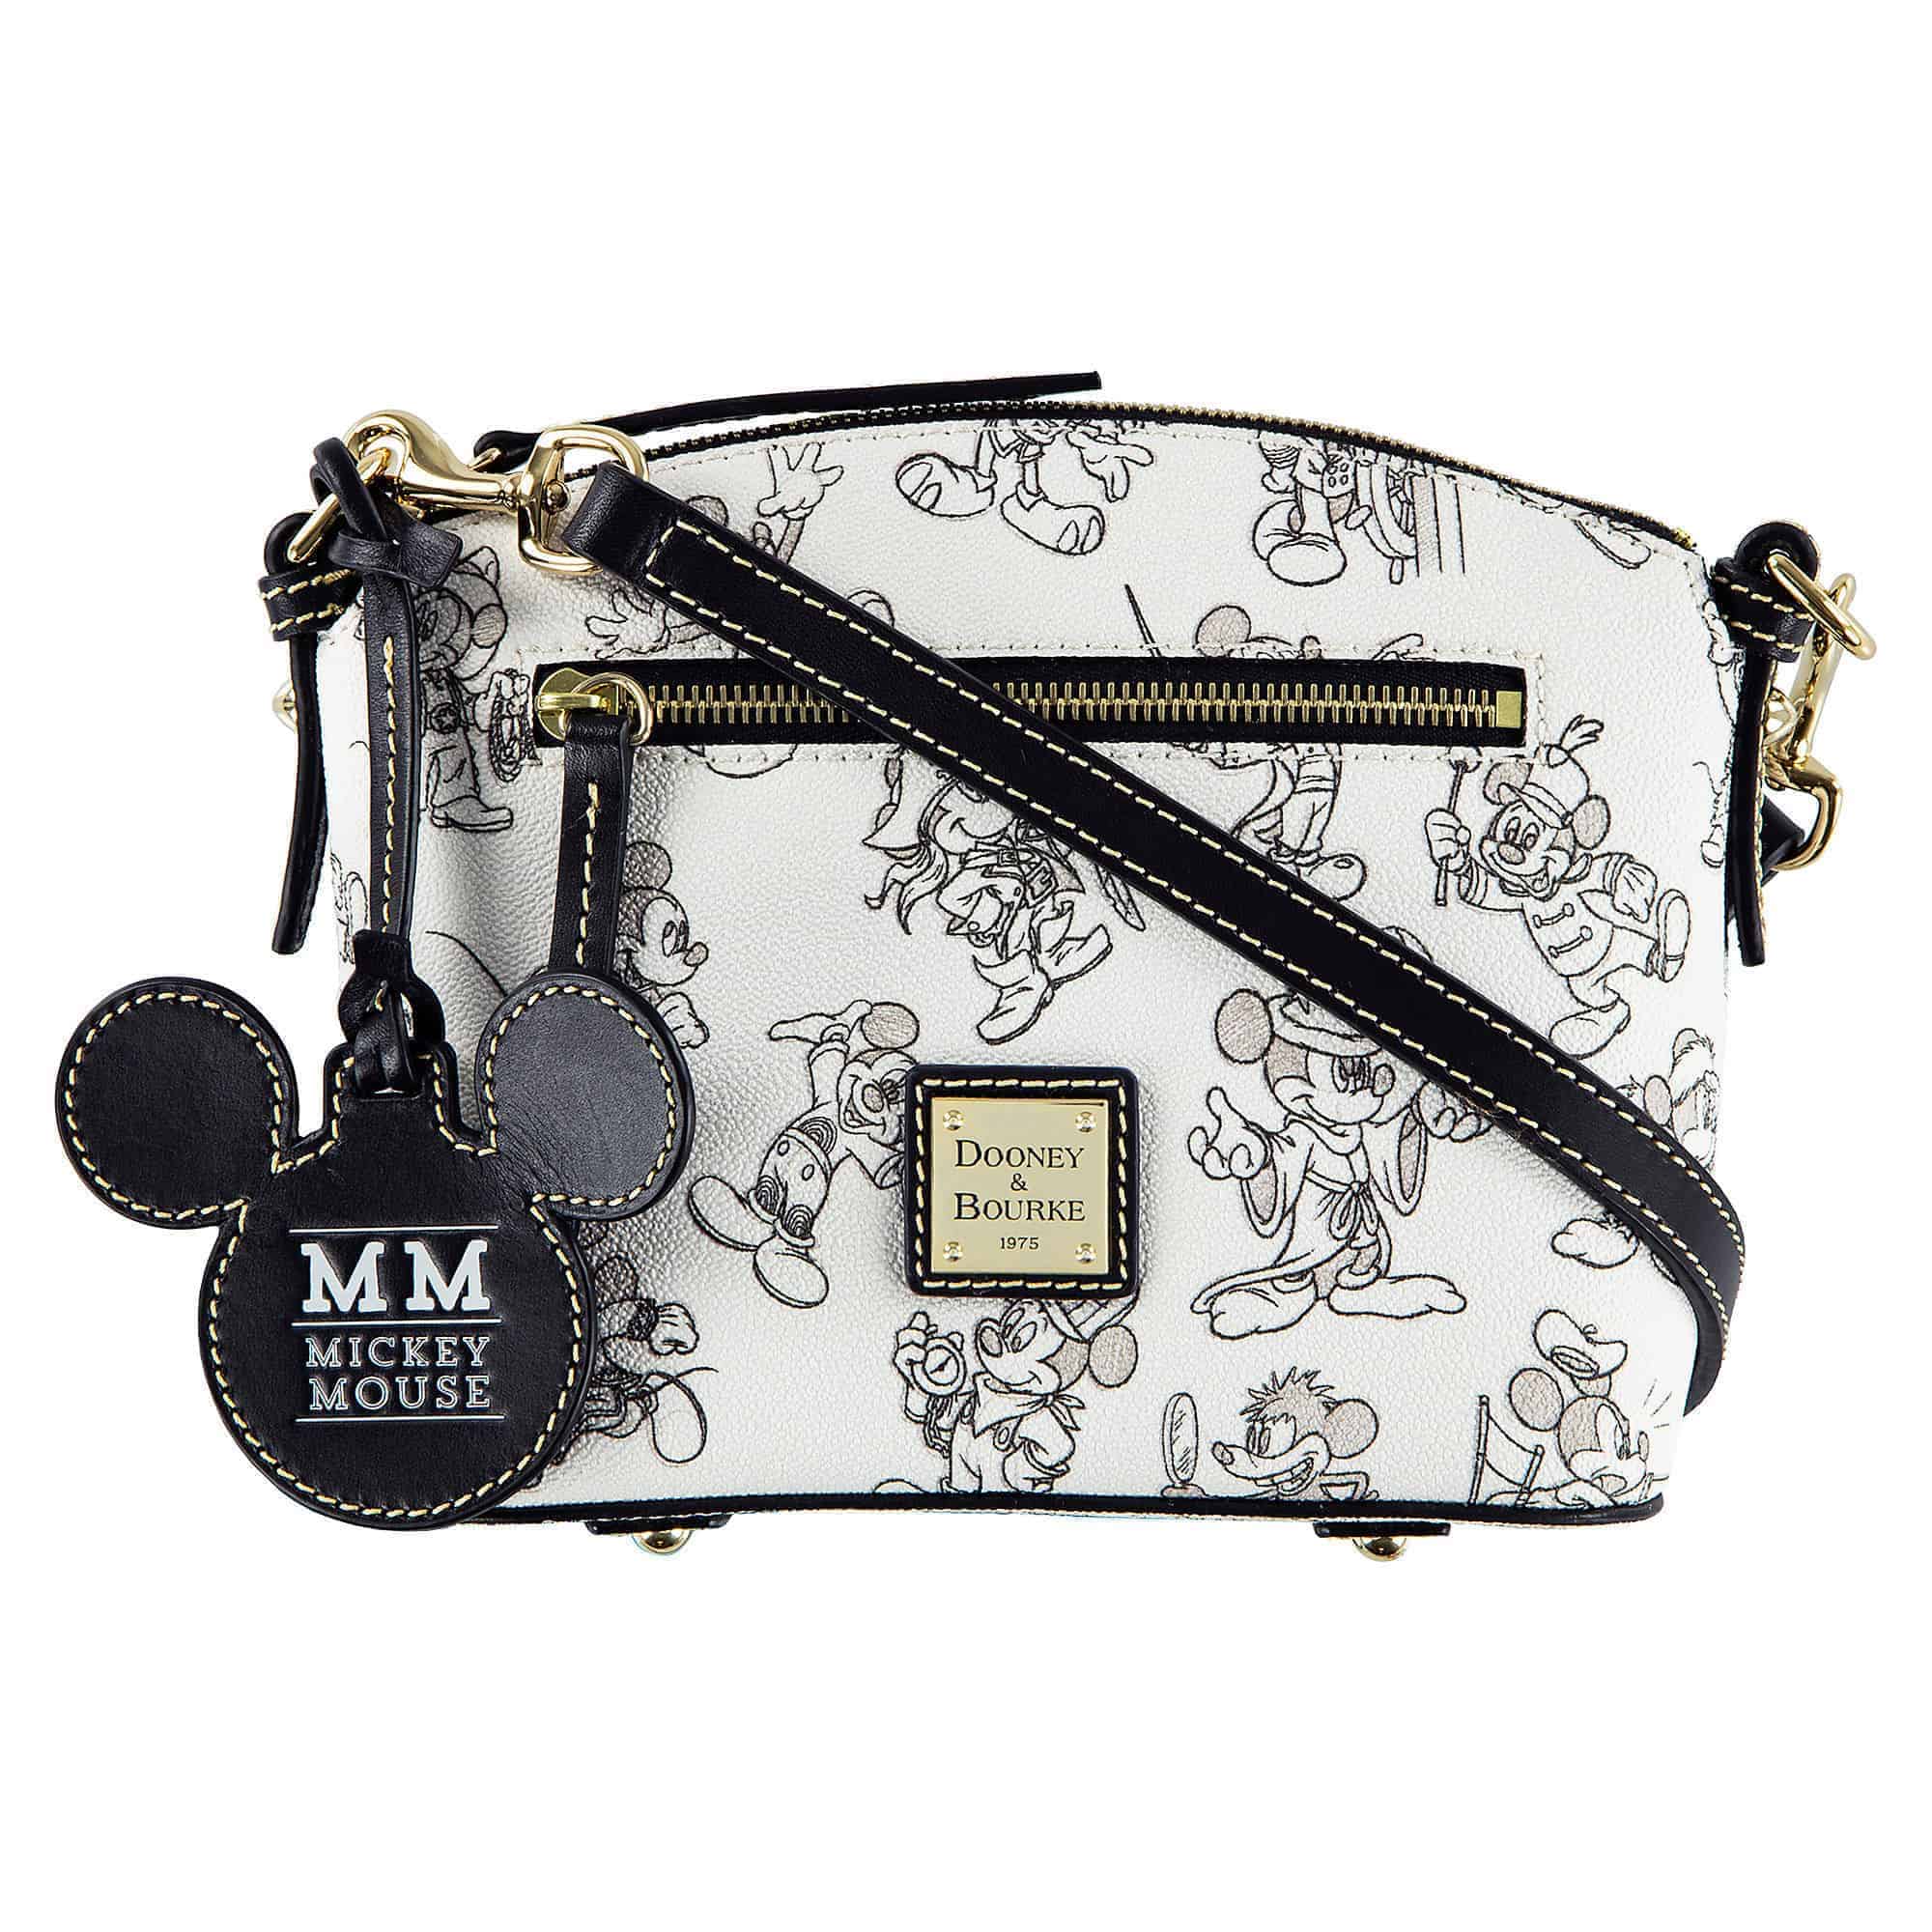 Mickey Mouse Crossbody Bag by Dooney & Bourke – 10th Anniversary